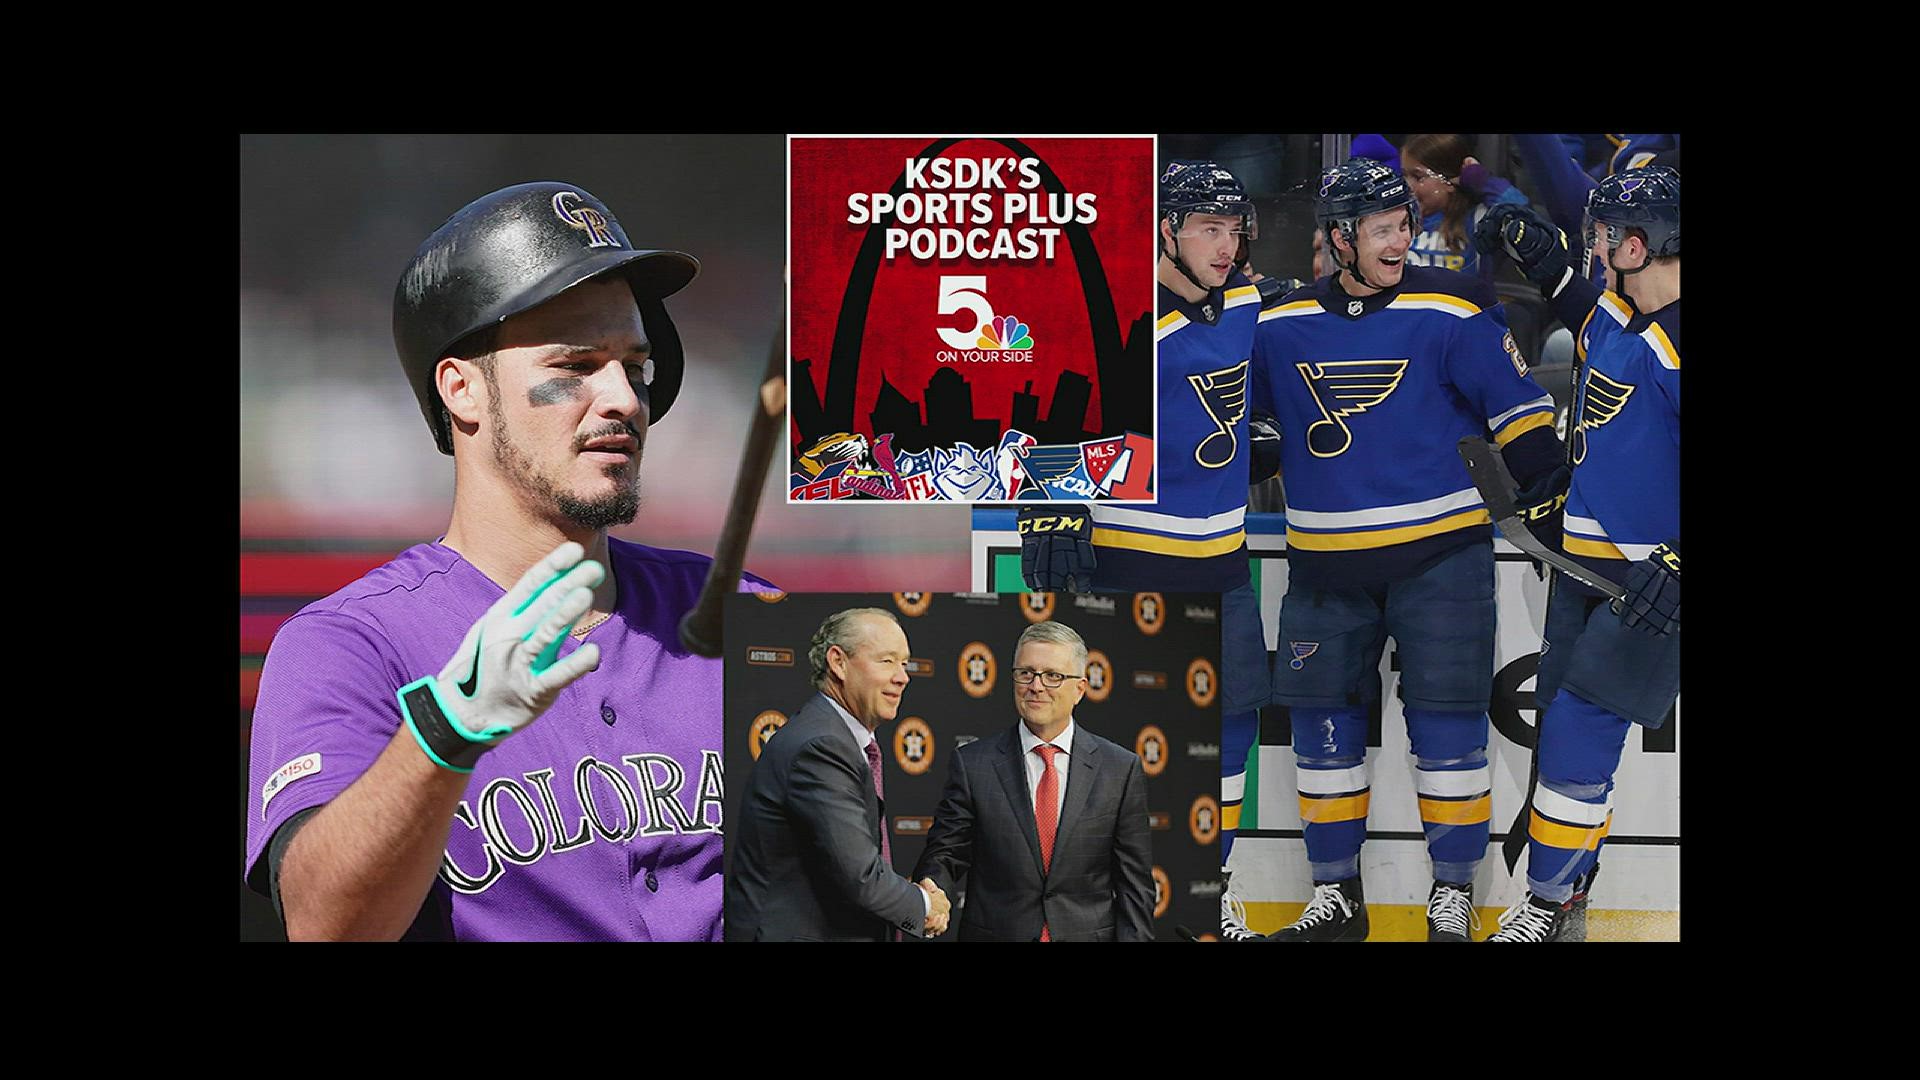 In this episode of the Sports Plus Podcast, Ahmad Hicks and Andy Mohler join Corey Miller to decipher the Nolan Arenado/Cardinals rumors, try to find a flaw with the